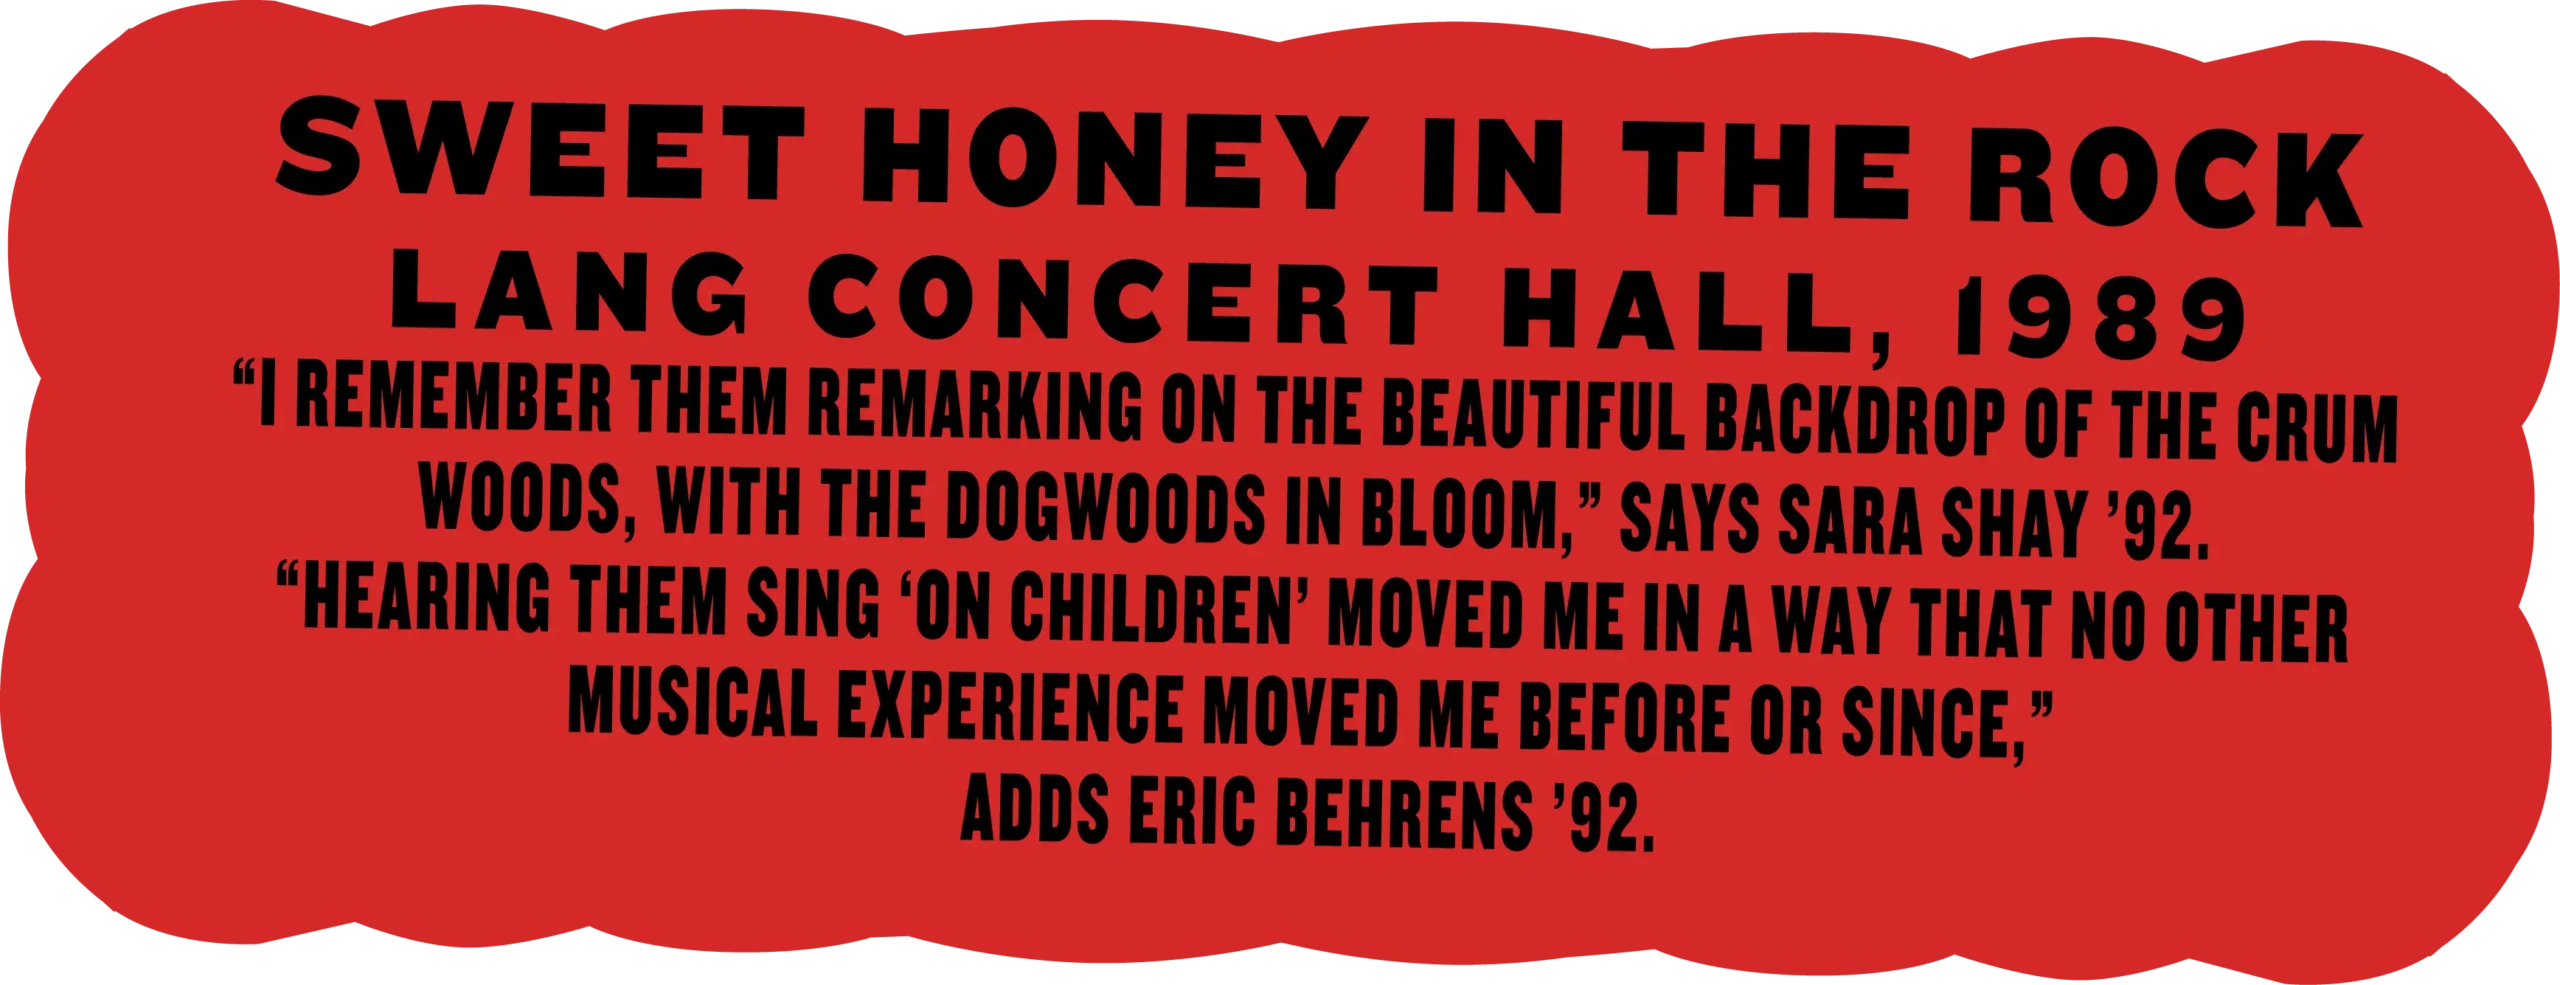 Sweet Honey in the Rock, Lang Concert Hall, 1989; “I remember them remarking on the beautiful backdrop of the Crum Woods, with the dogwoods in bloom,” says Sara Shay ’92. “Hearing them sing ‘On Children’ moved me in a way that no other musical experience moved me before or since,” adds Eric Behrens ’92.